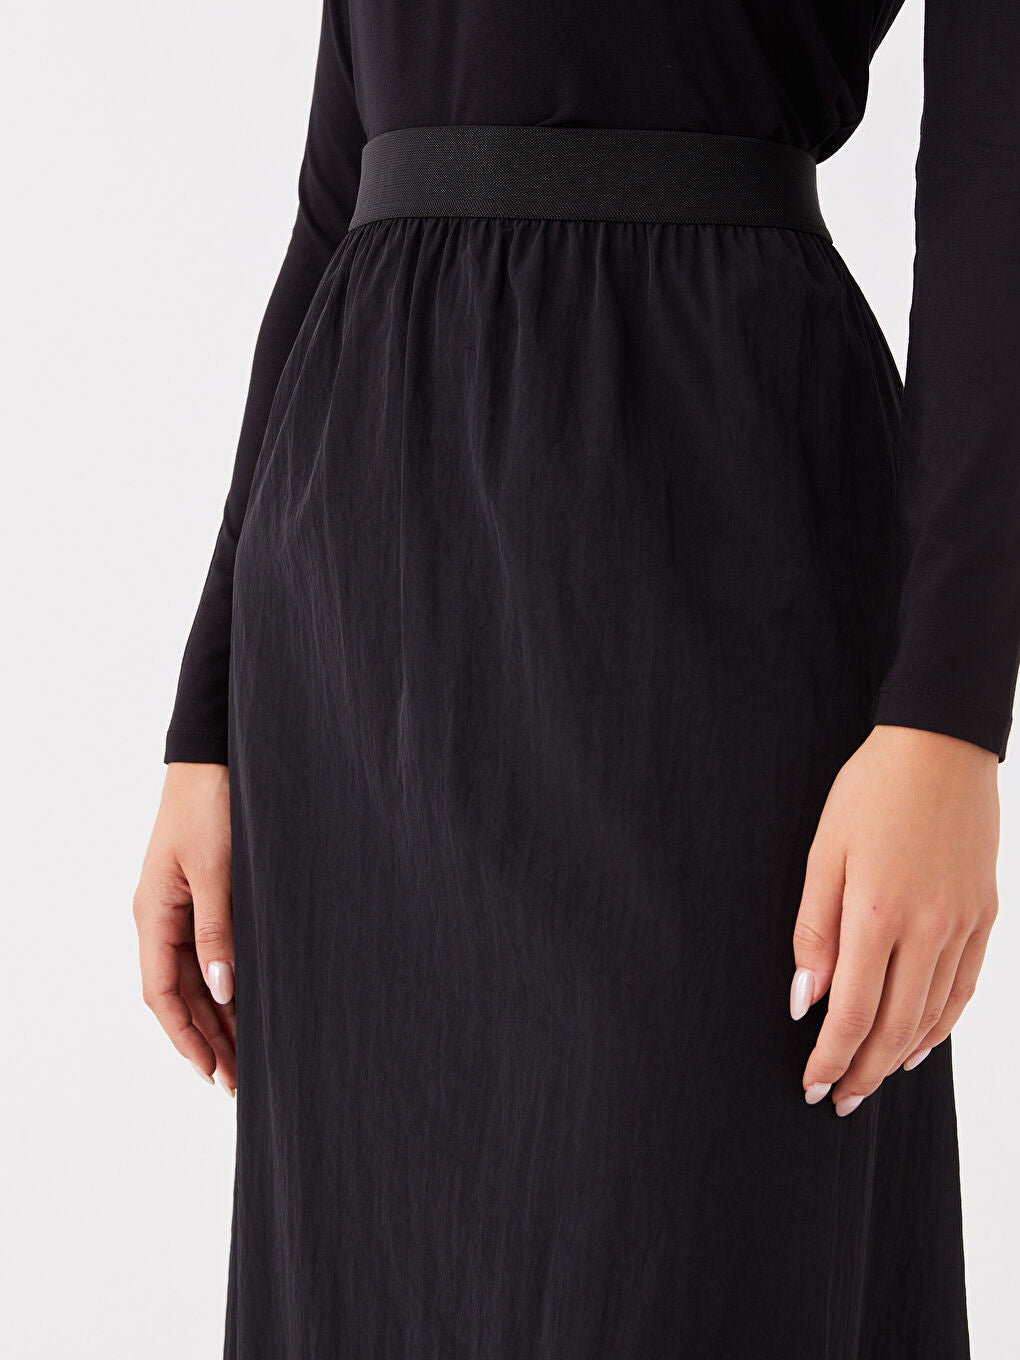 Comfortable Fit Women Skirt With Elastic Waist